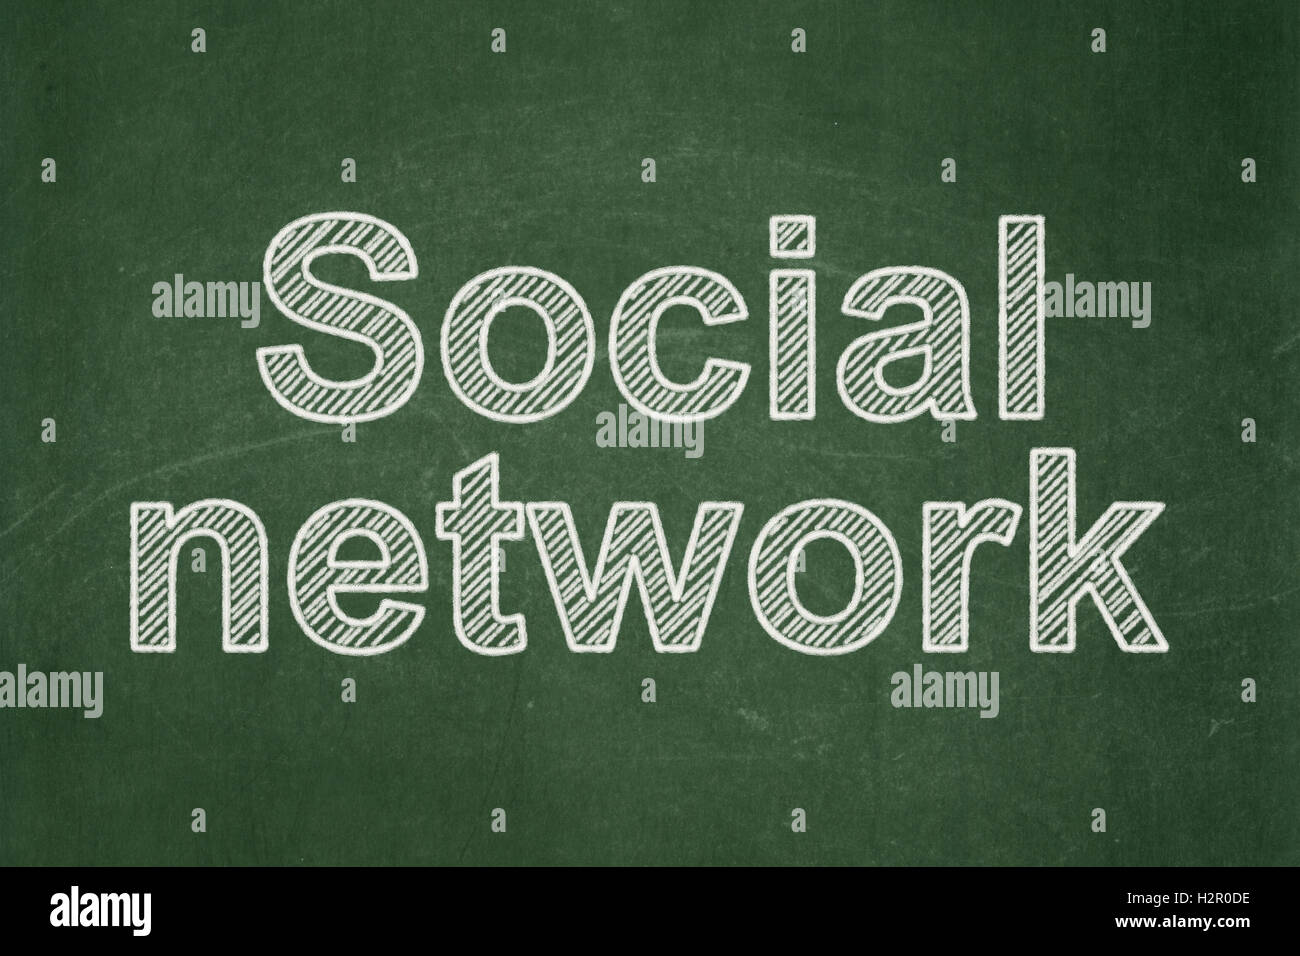 Social network concept: Social Network on chalkboard background Stock Photo